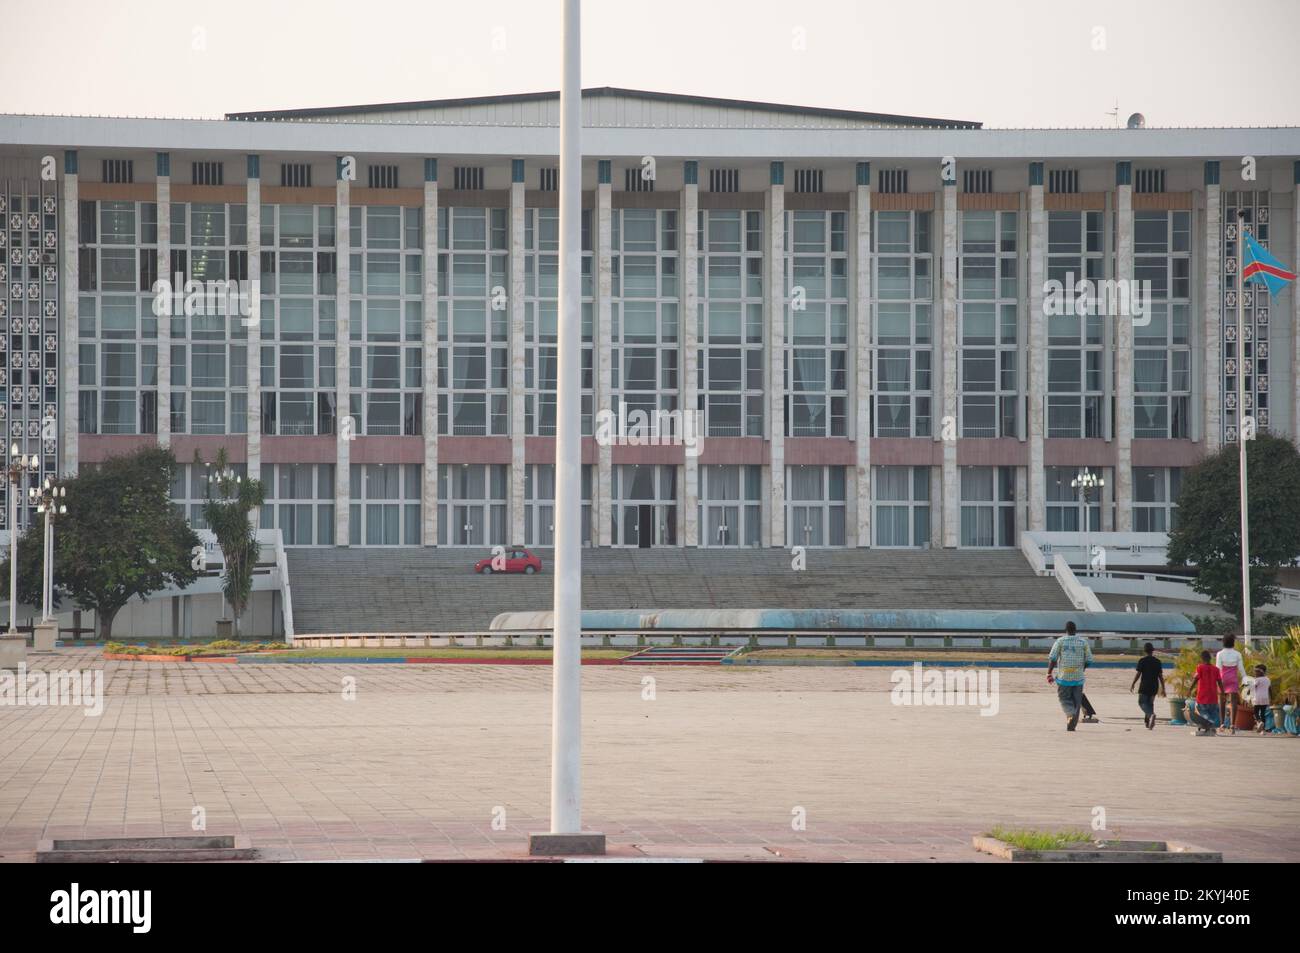 People's Palace (Palais du Peuple), This building was built by the Chinese and now contains the Congolese Parliament, and many governemnt offices. Stock Photo